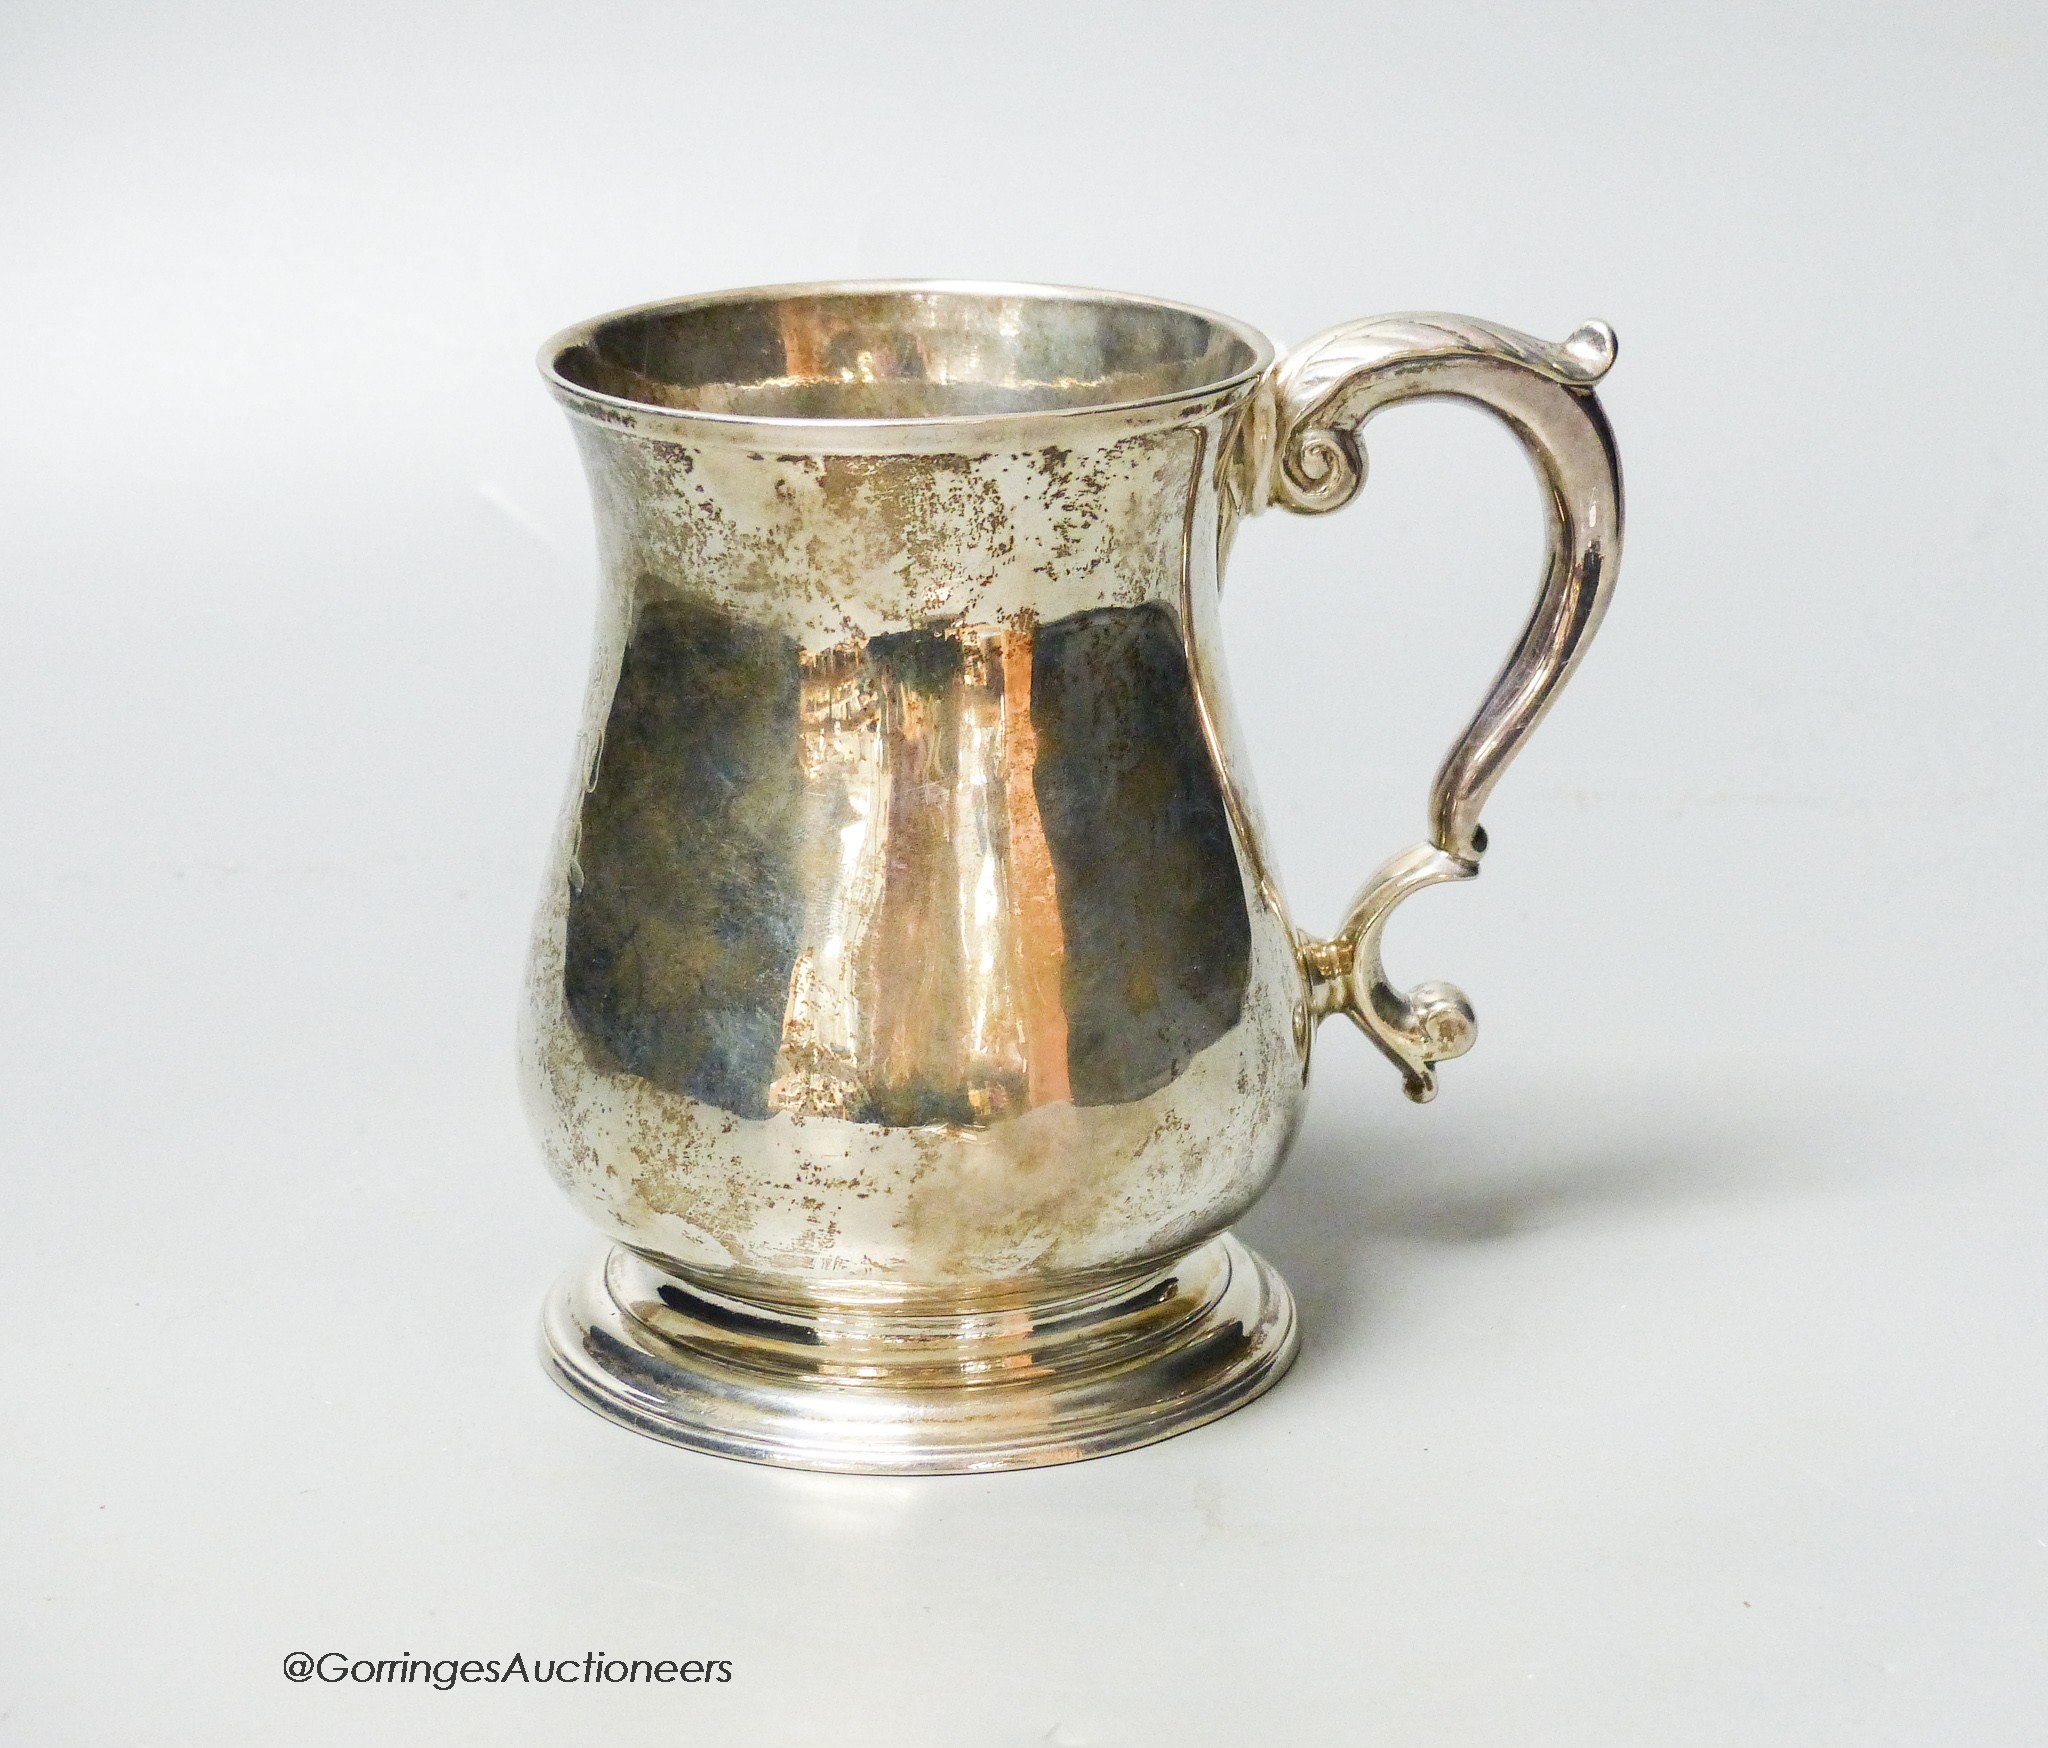 A George II silver baluster mug, with acanthus leaf capped handled and engraved crest, Henry Brind, London, 1743, height 11.7cm, 11.5oz.                                                                                    